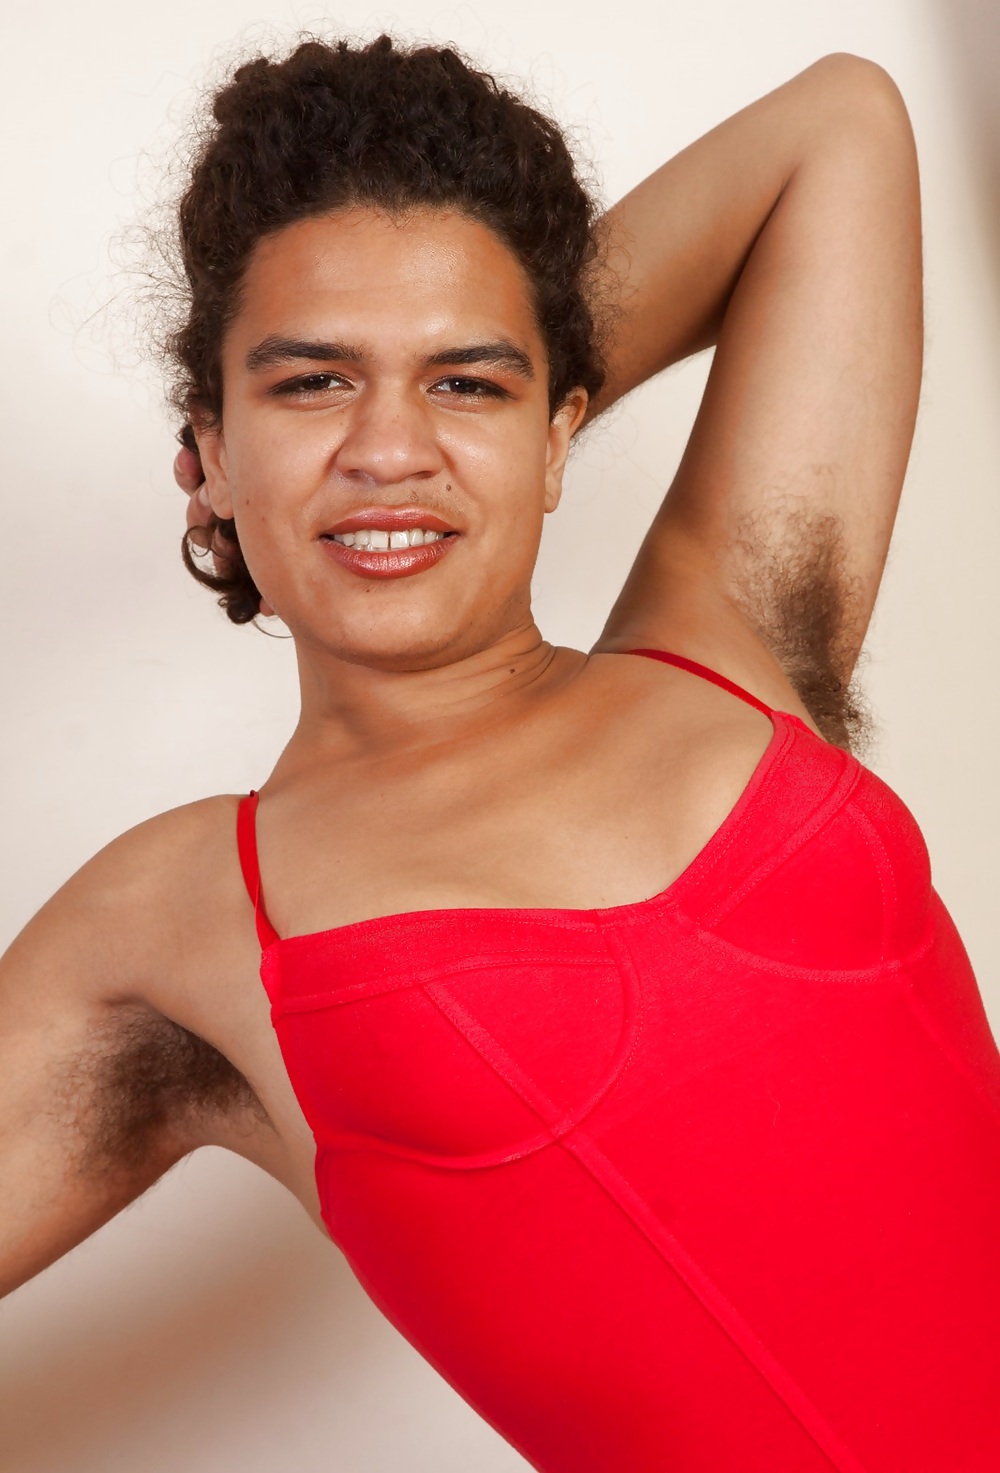 Girls with hairy, unshaven armpits U to Z #23683568